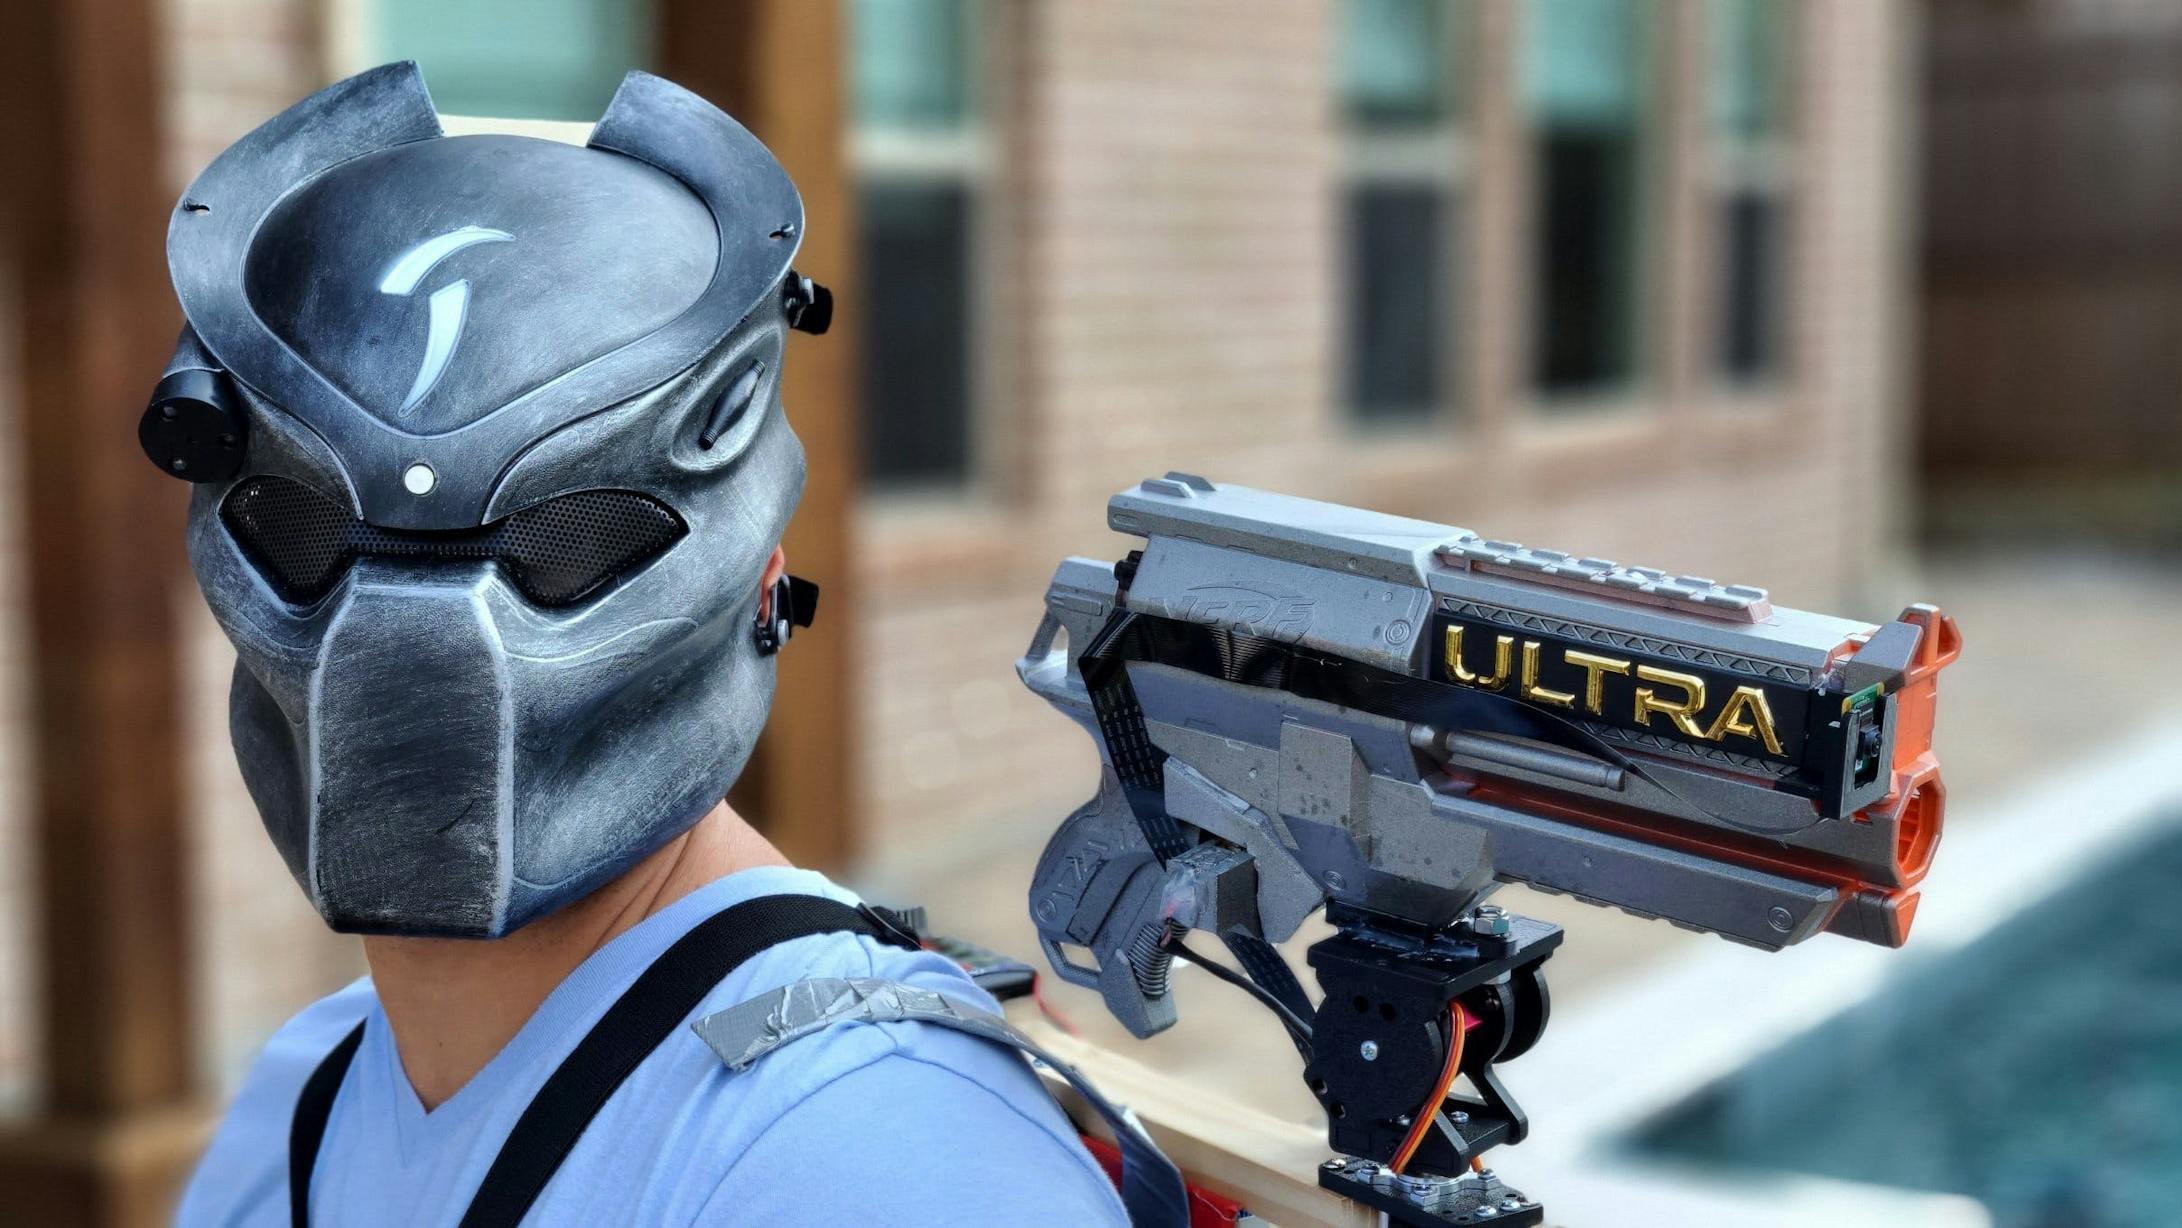 Predator-Style, Shoulder-Mounted Nerf Blaster Uses Raspberry Pi to Track Faces - Hackster.io